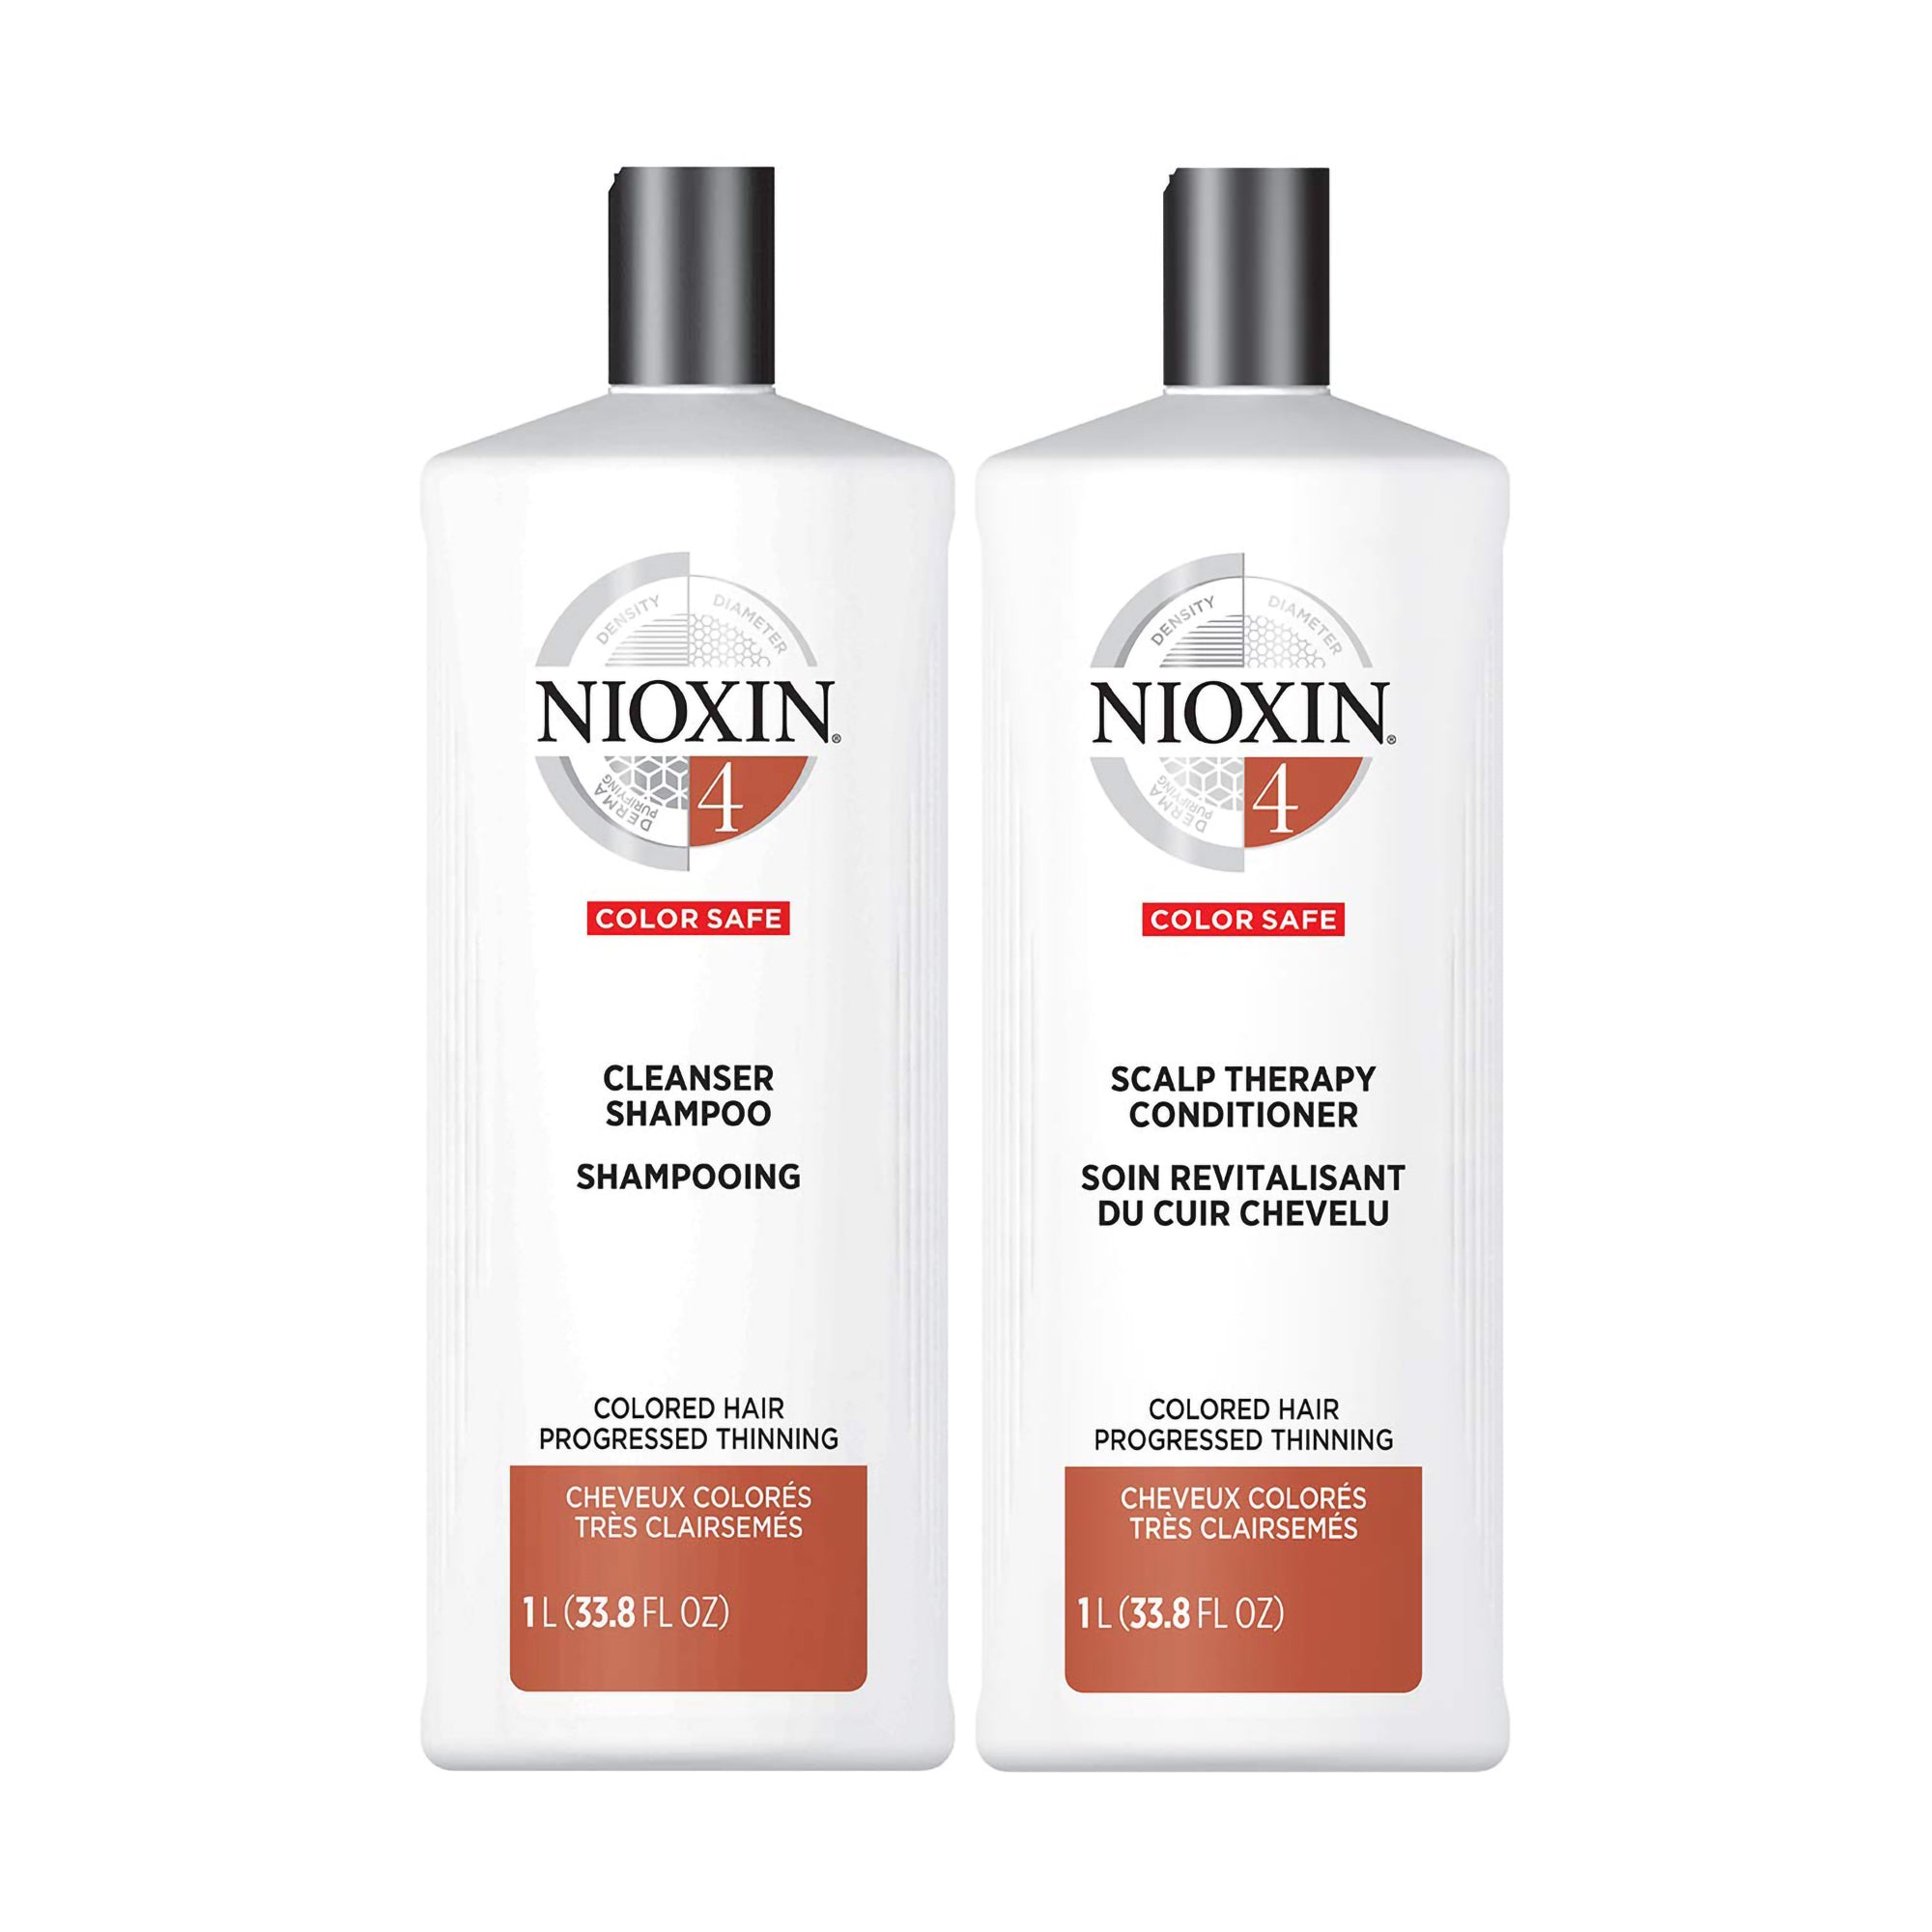 Nioxin System 4 Cleanser Shampoo & Scalp Therapy Conditioner Bundle ($104 Value) / 33.OZ